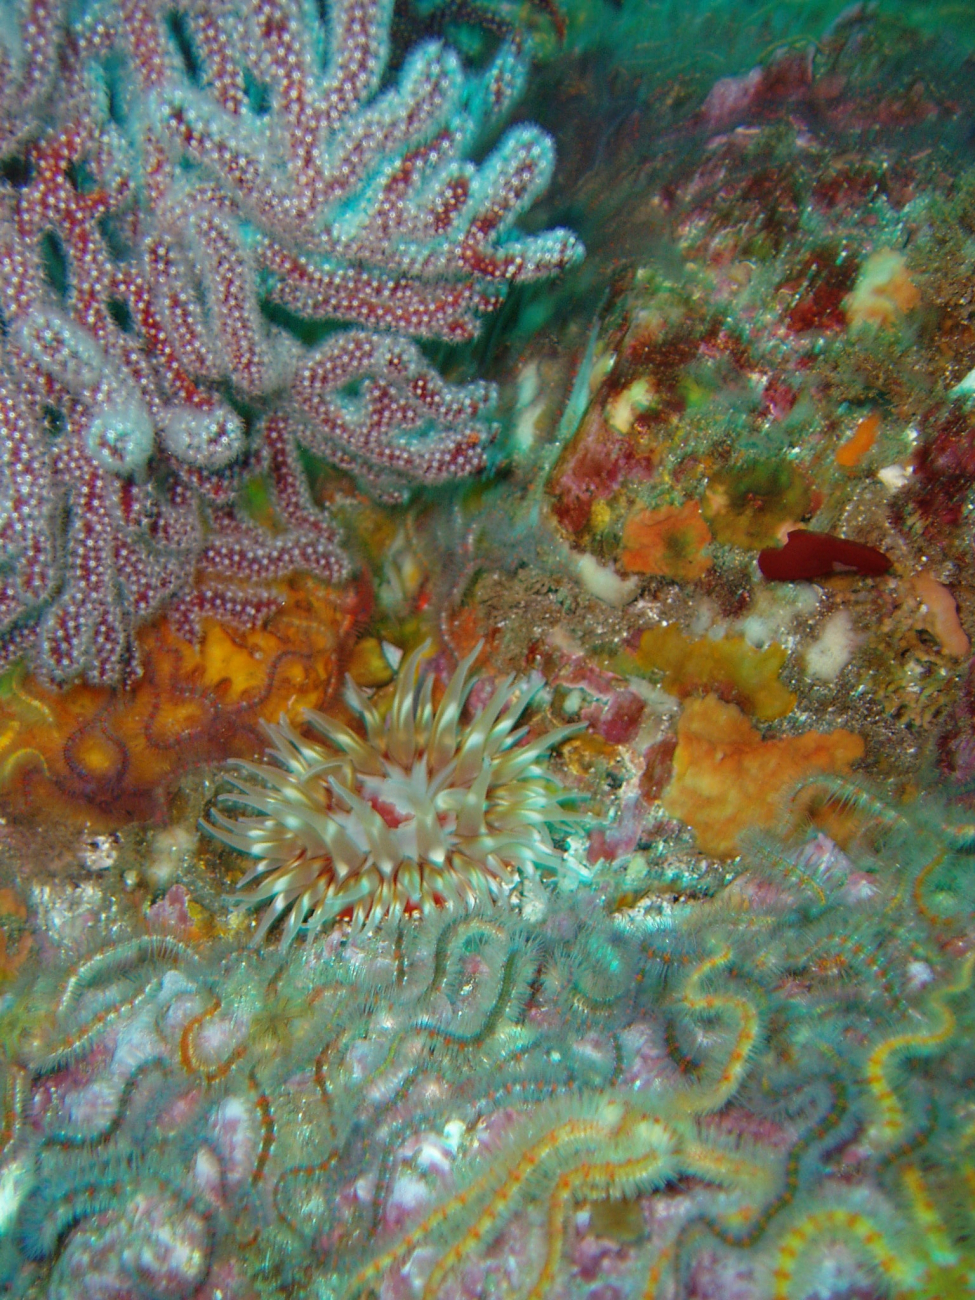 Fragile brittle stars, red gorgonian coral and sea anemone